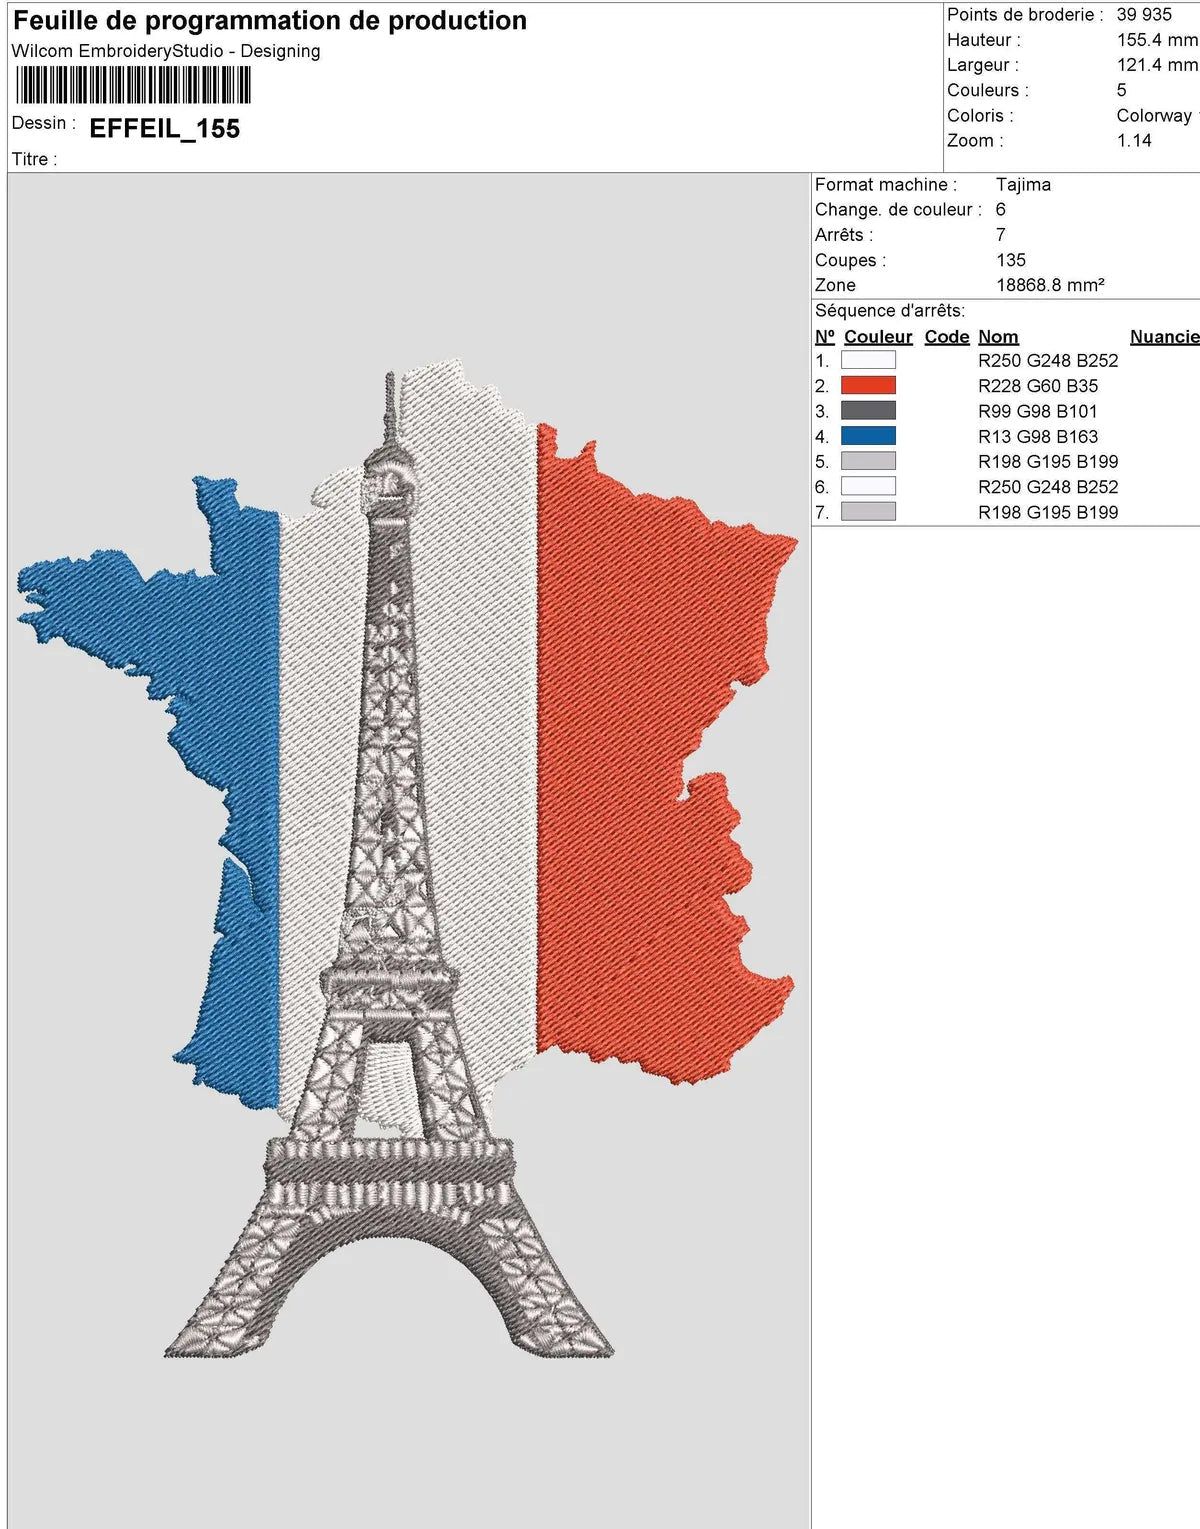 Paris Eiffel Tower Embroidery Design - Three Sizes, French Tricolor Map, and Iconic Landmark - Embroidery Designs - FineryEmbroidery